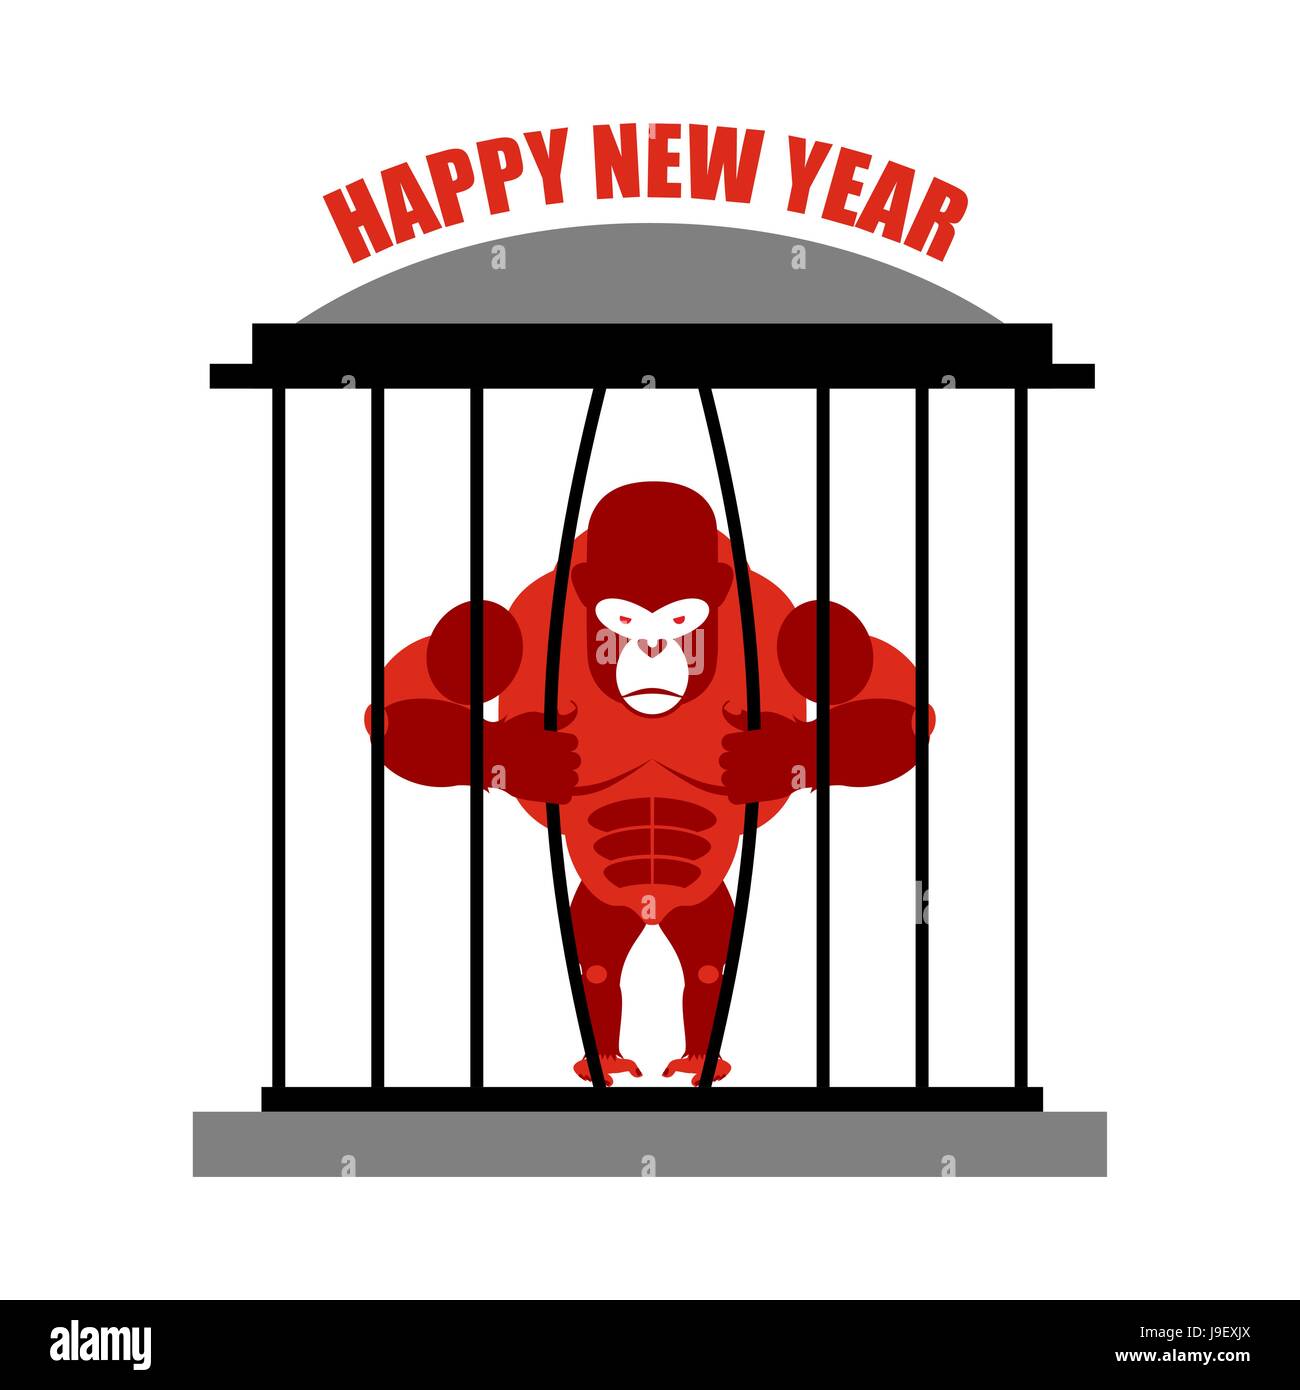 Gorilla wants to escape from cage. Symbol of new year red monkey. Escape wild beast. Stock Vector